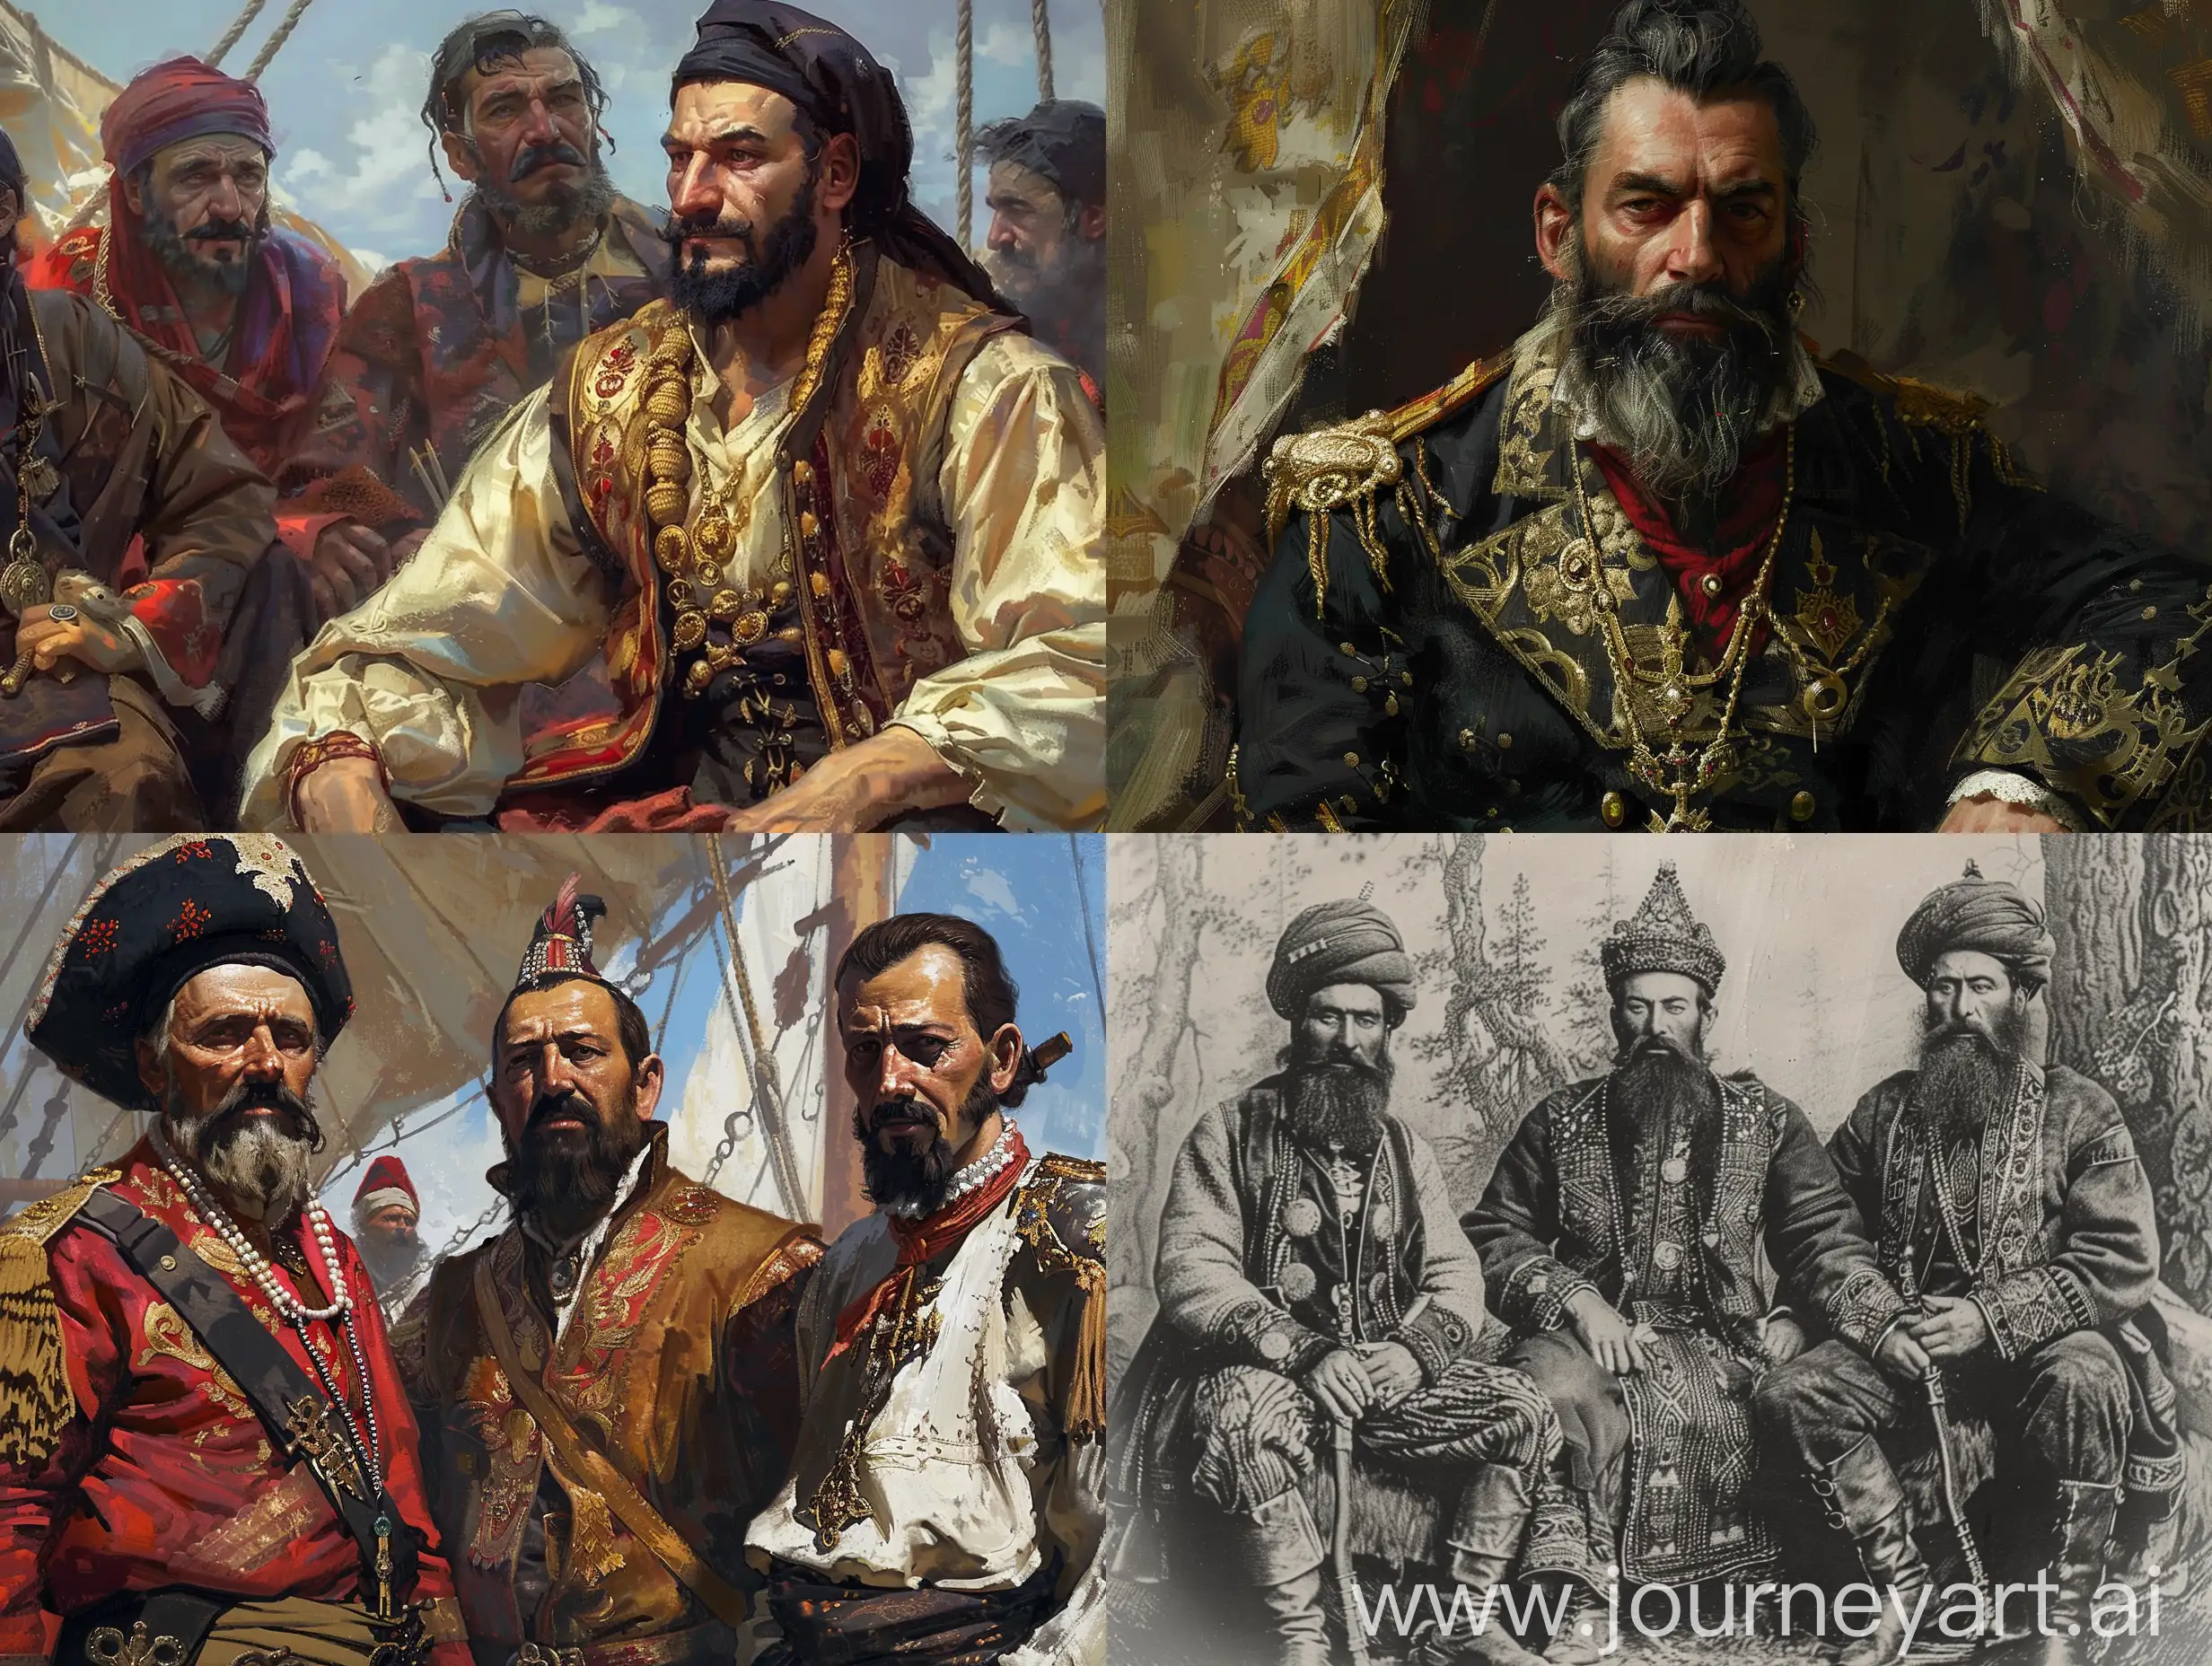 His family, the Dipsheu dynasty, was a famous pirate and bandit clan from the Ubykh province of Circassia, exiled to the Ottoman Empire during the genocide against Circassians in the 1860s.